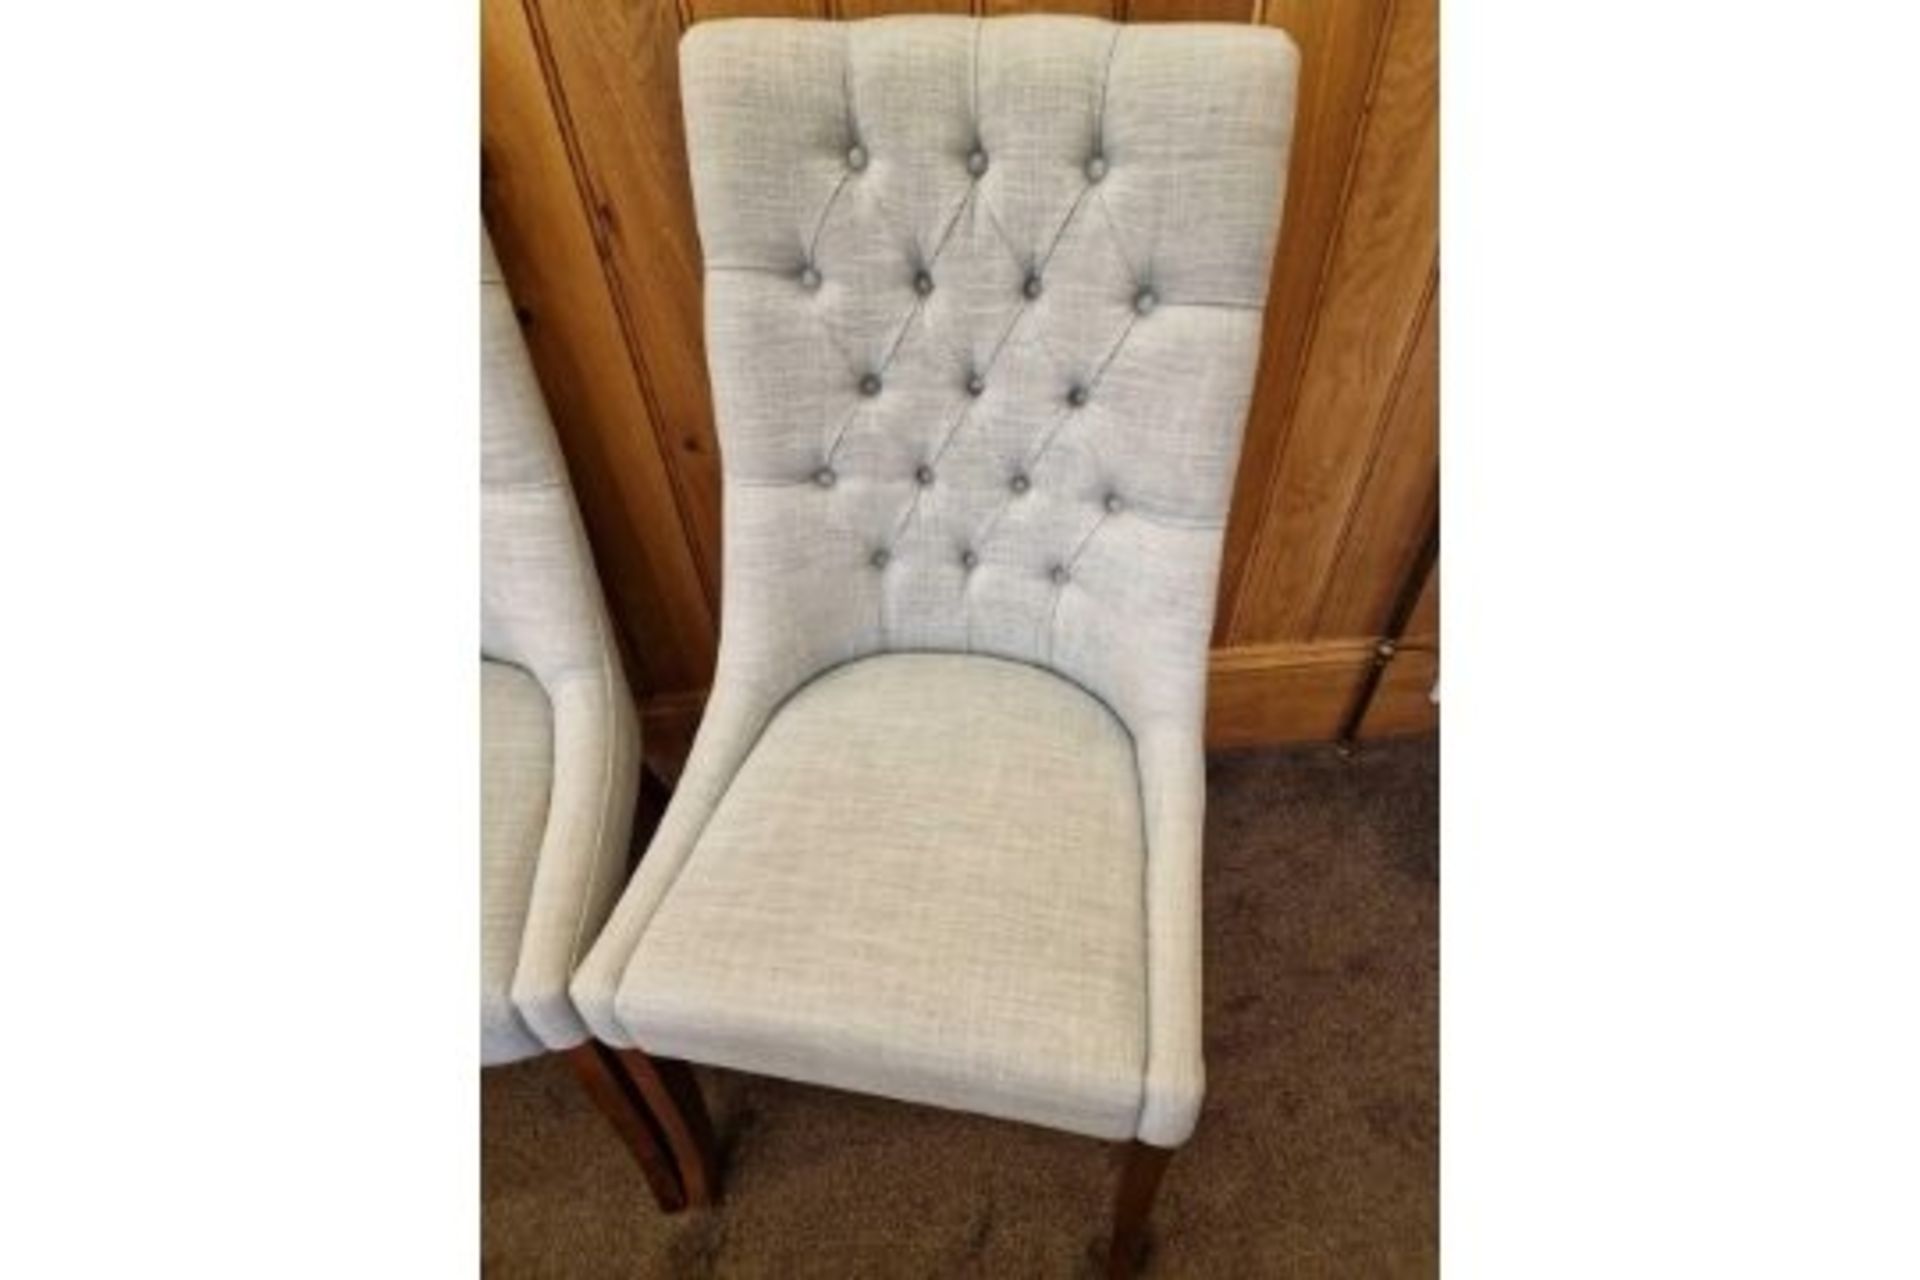 A Pair Of Bourne Furniture Sing Dining Chair Solid Timber Tufted Back Dining Chair Upholstered In - Bild 2 aus 3